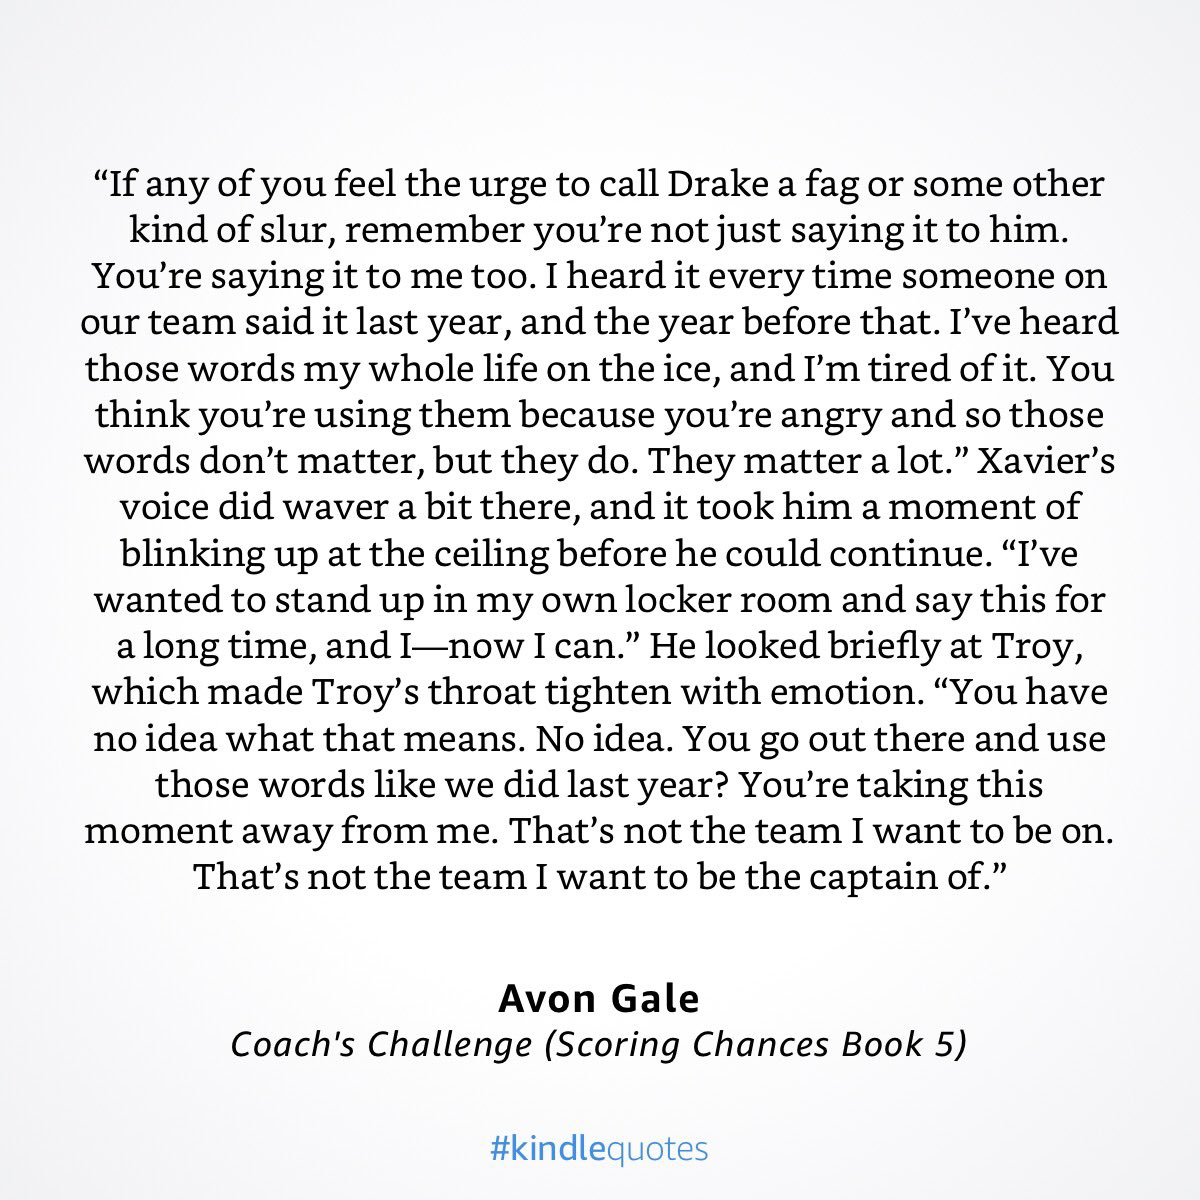 5 / COACH'S CHALLENGE - openly gay coach who curses like a sailor vs aging player trying to quit hockey on his own terms  https://www.amazon.com/dp/B07XC3BMQC/ref=cm_sw_r_cp_awdb_t1_oAnOEbDYB6X5K